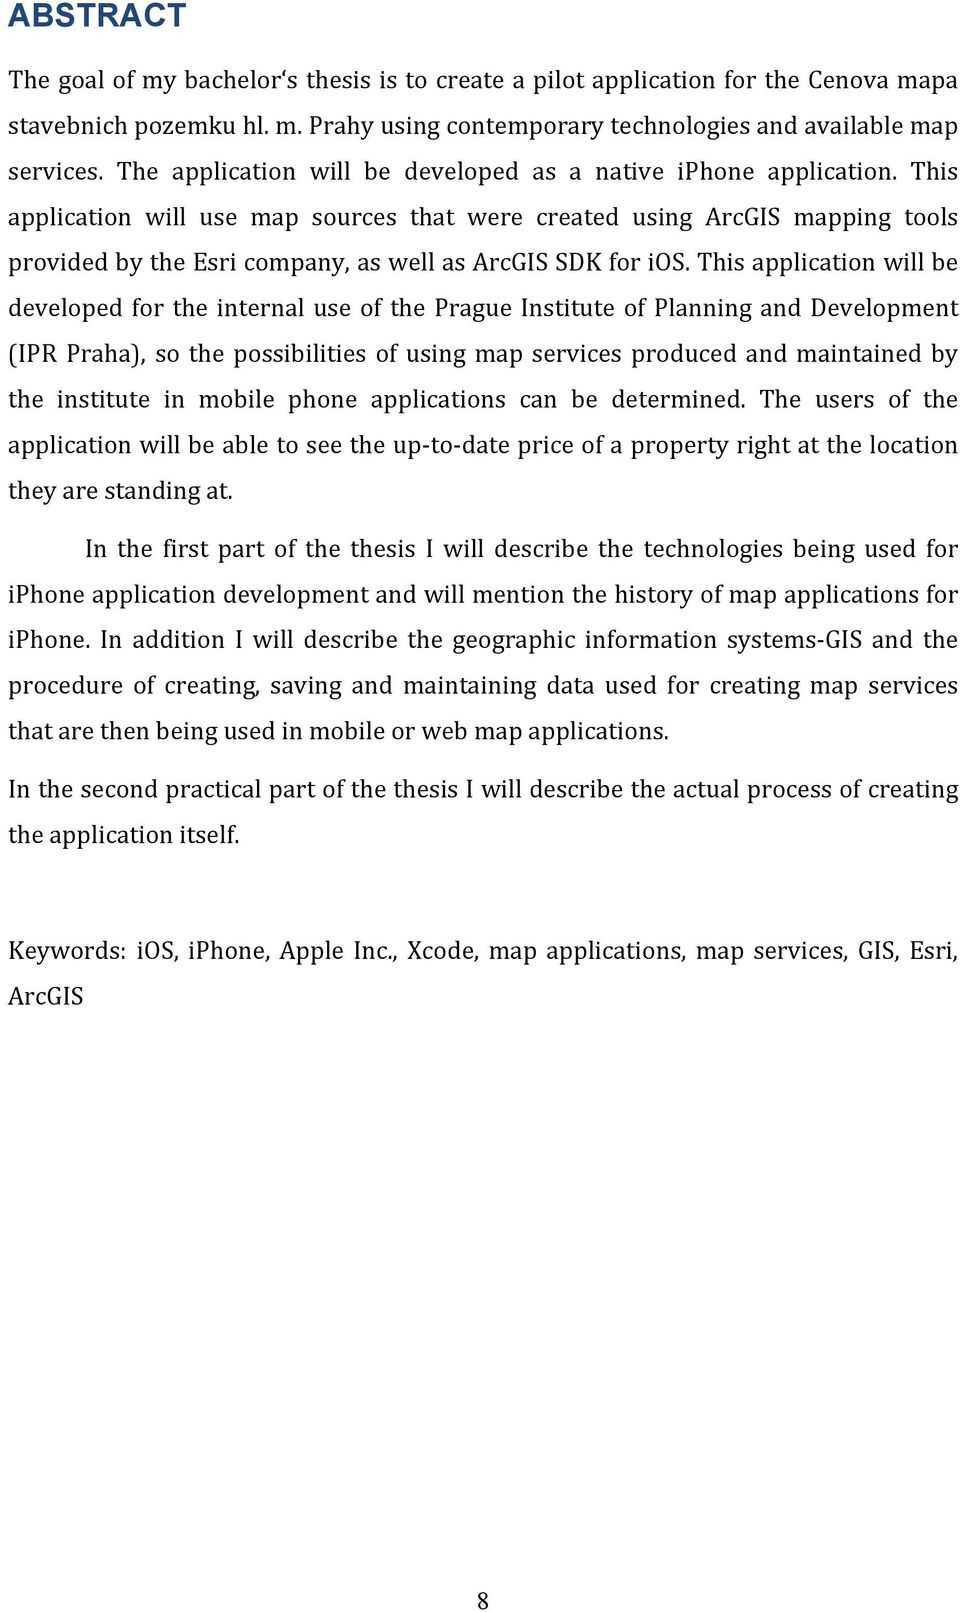 This application will use map sources that were created using ArcGIS mapping tools provided by the Esri company, as well as ArcGIS SDK for ios.